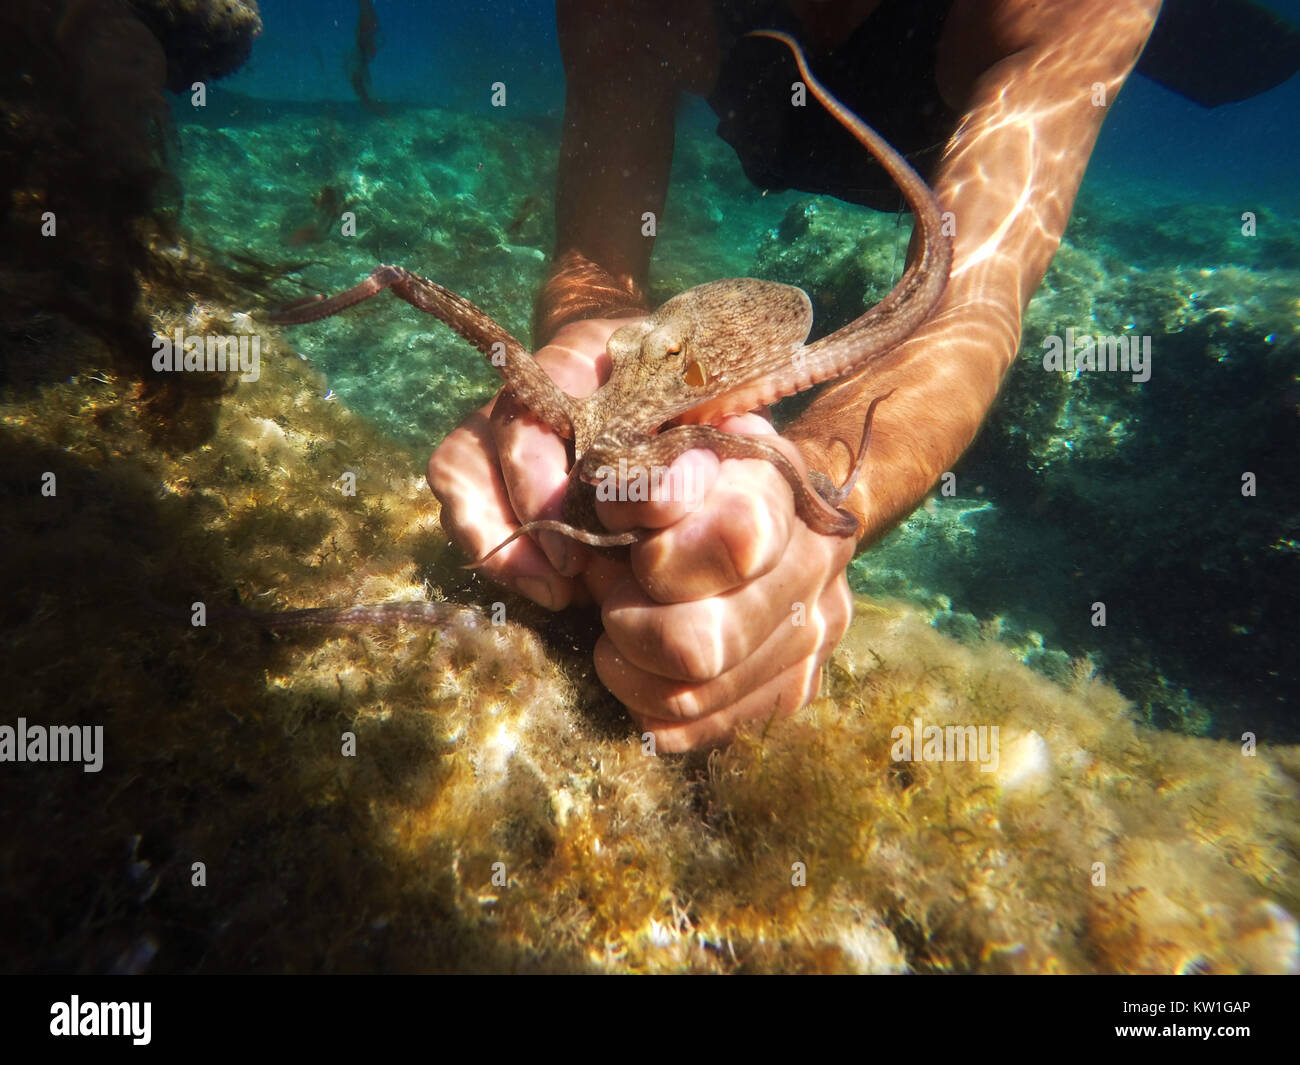 Small octopus caught with hands in the Adriatic sea. Stock Photo